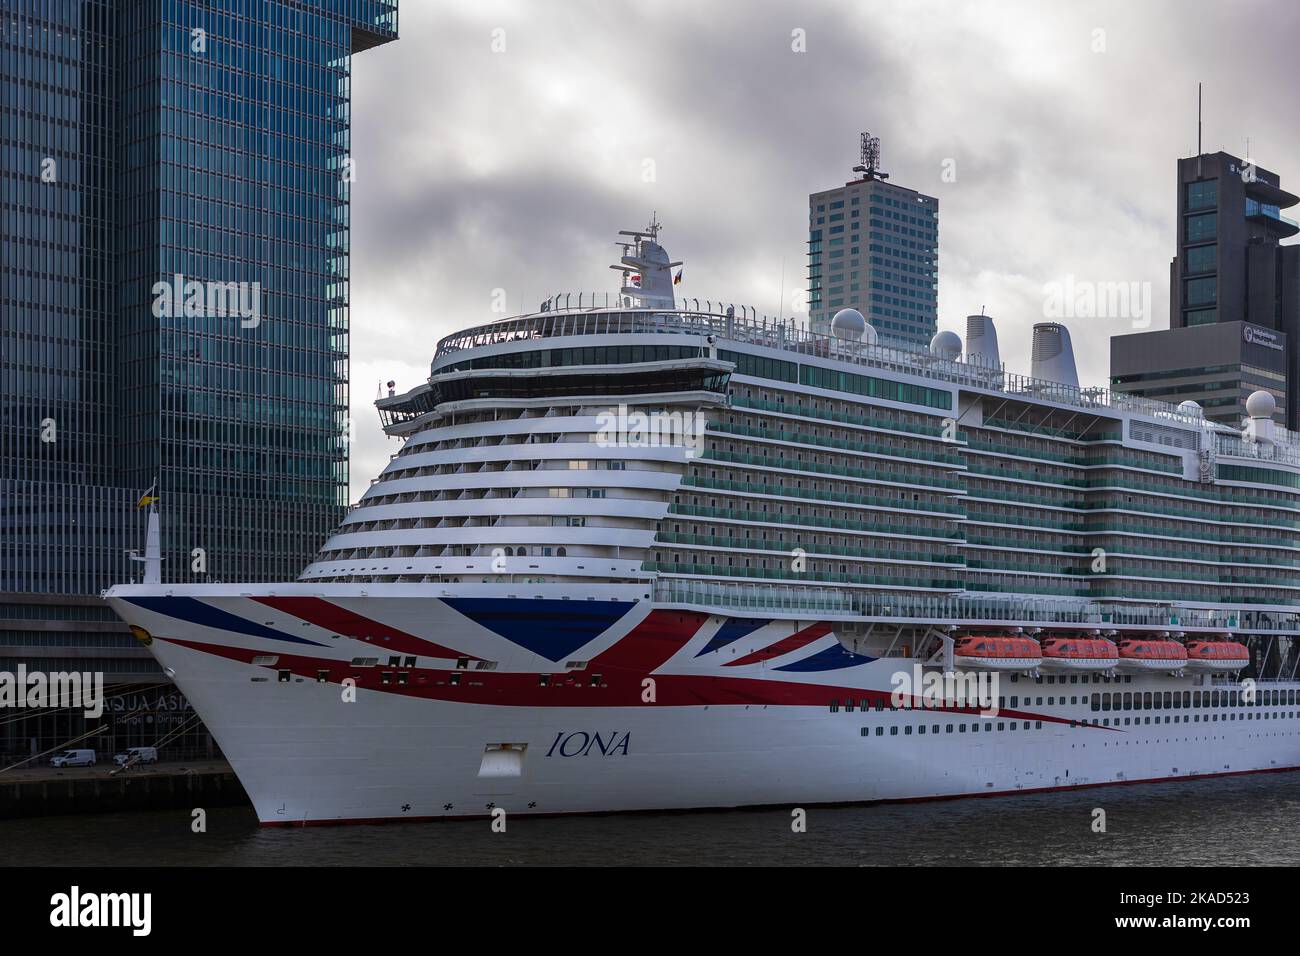 The Iona, a luxury cruise ship, build in 2020 at the Wilhelminapier, Rotterdam, the Netherlands Stock Photo